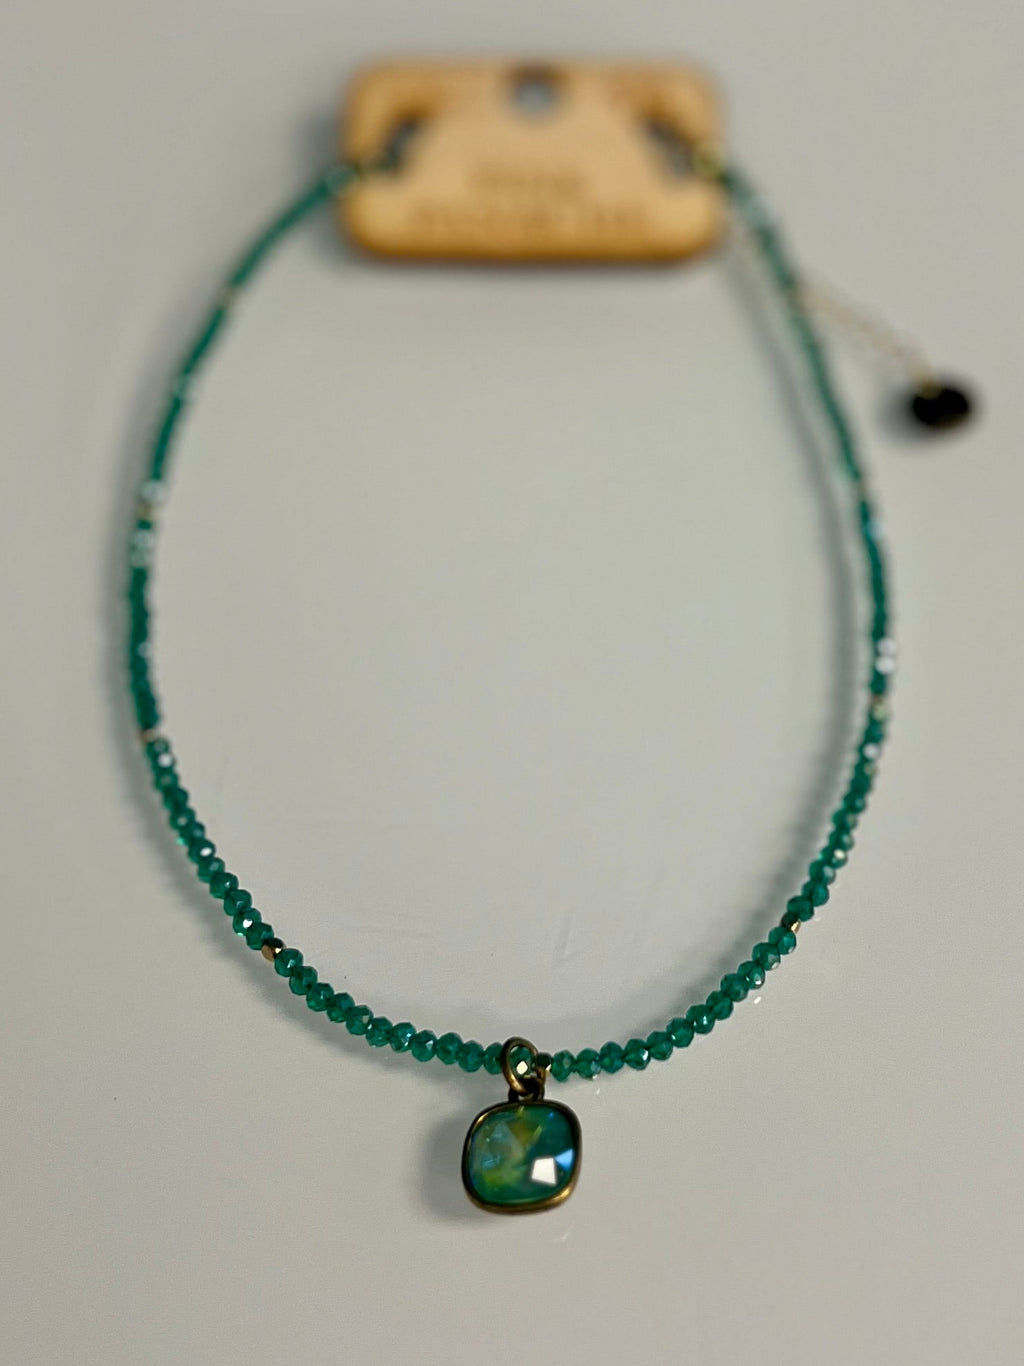 On The Green Choker Necklace | gussieduponline